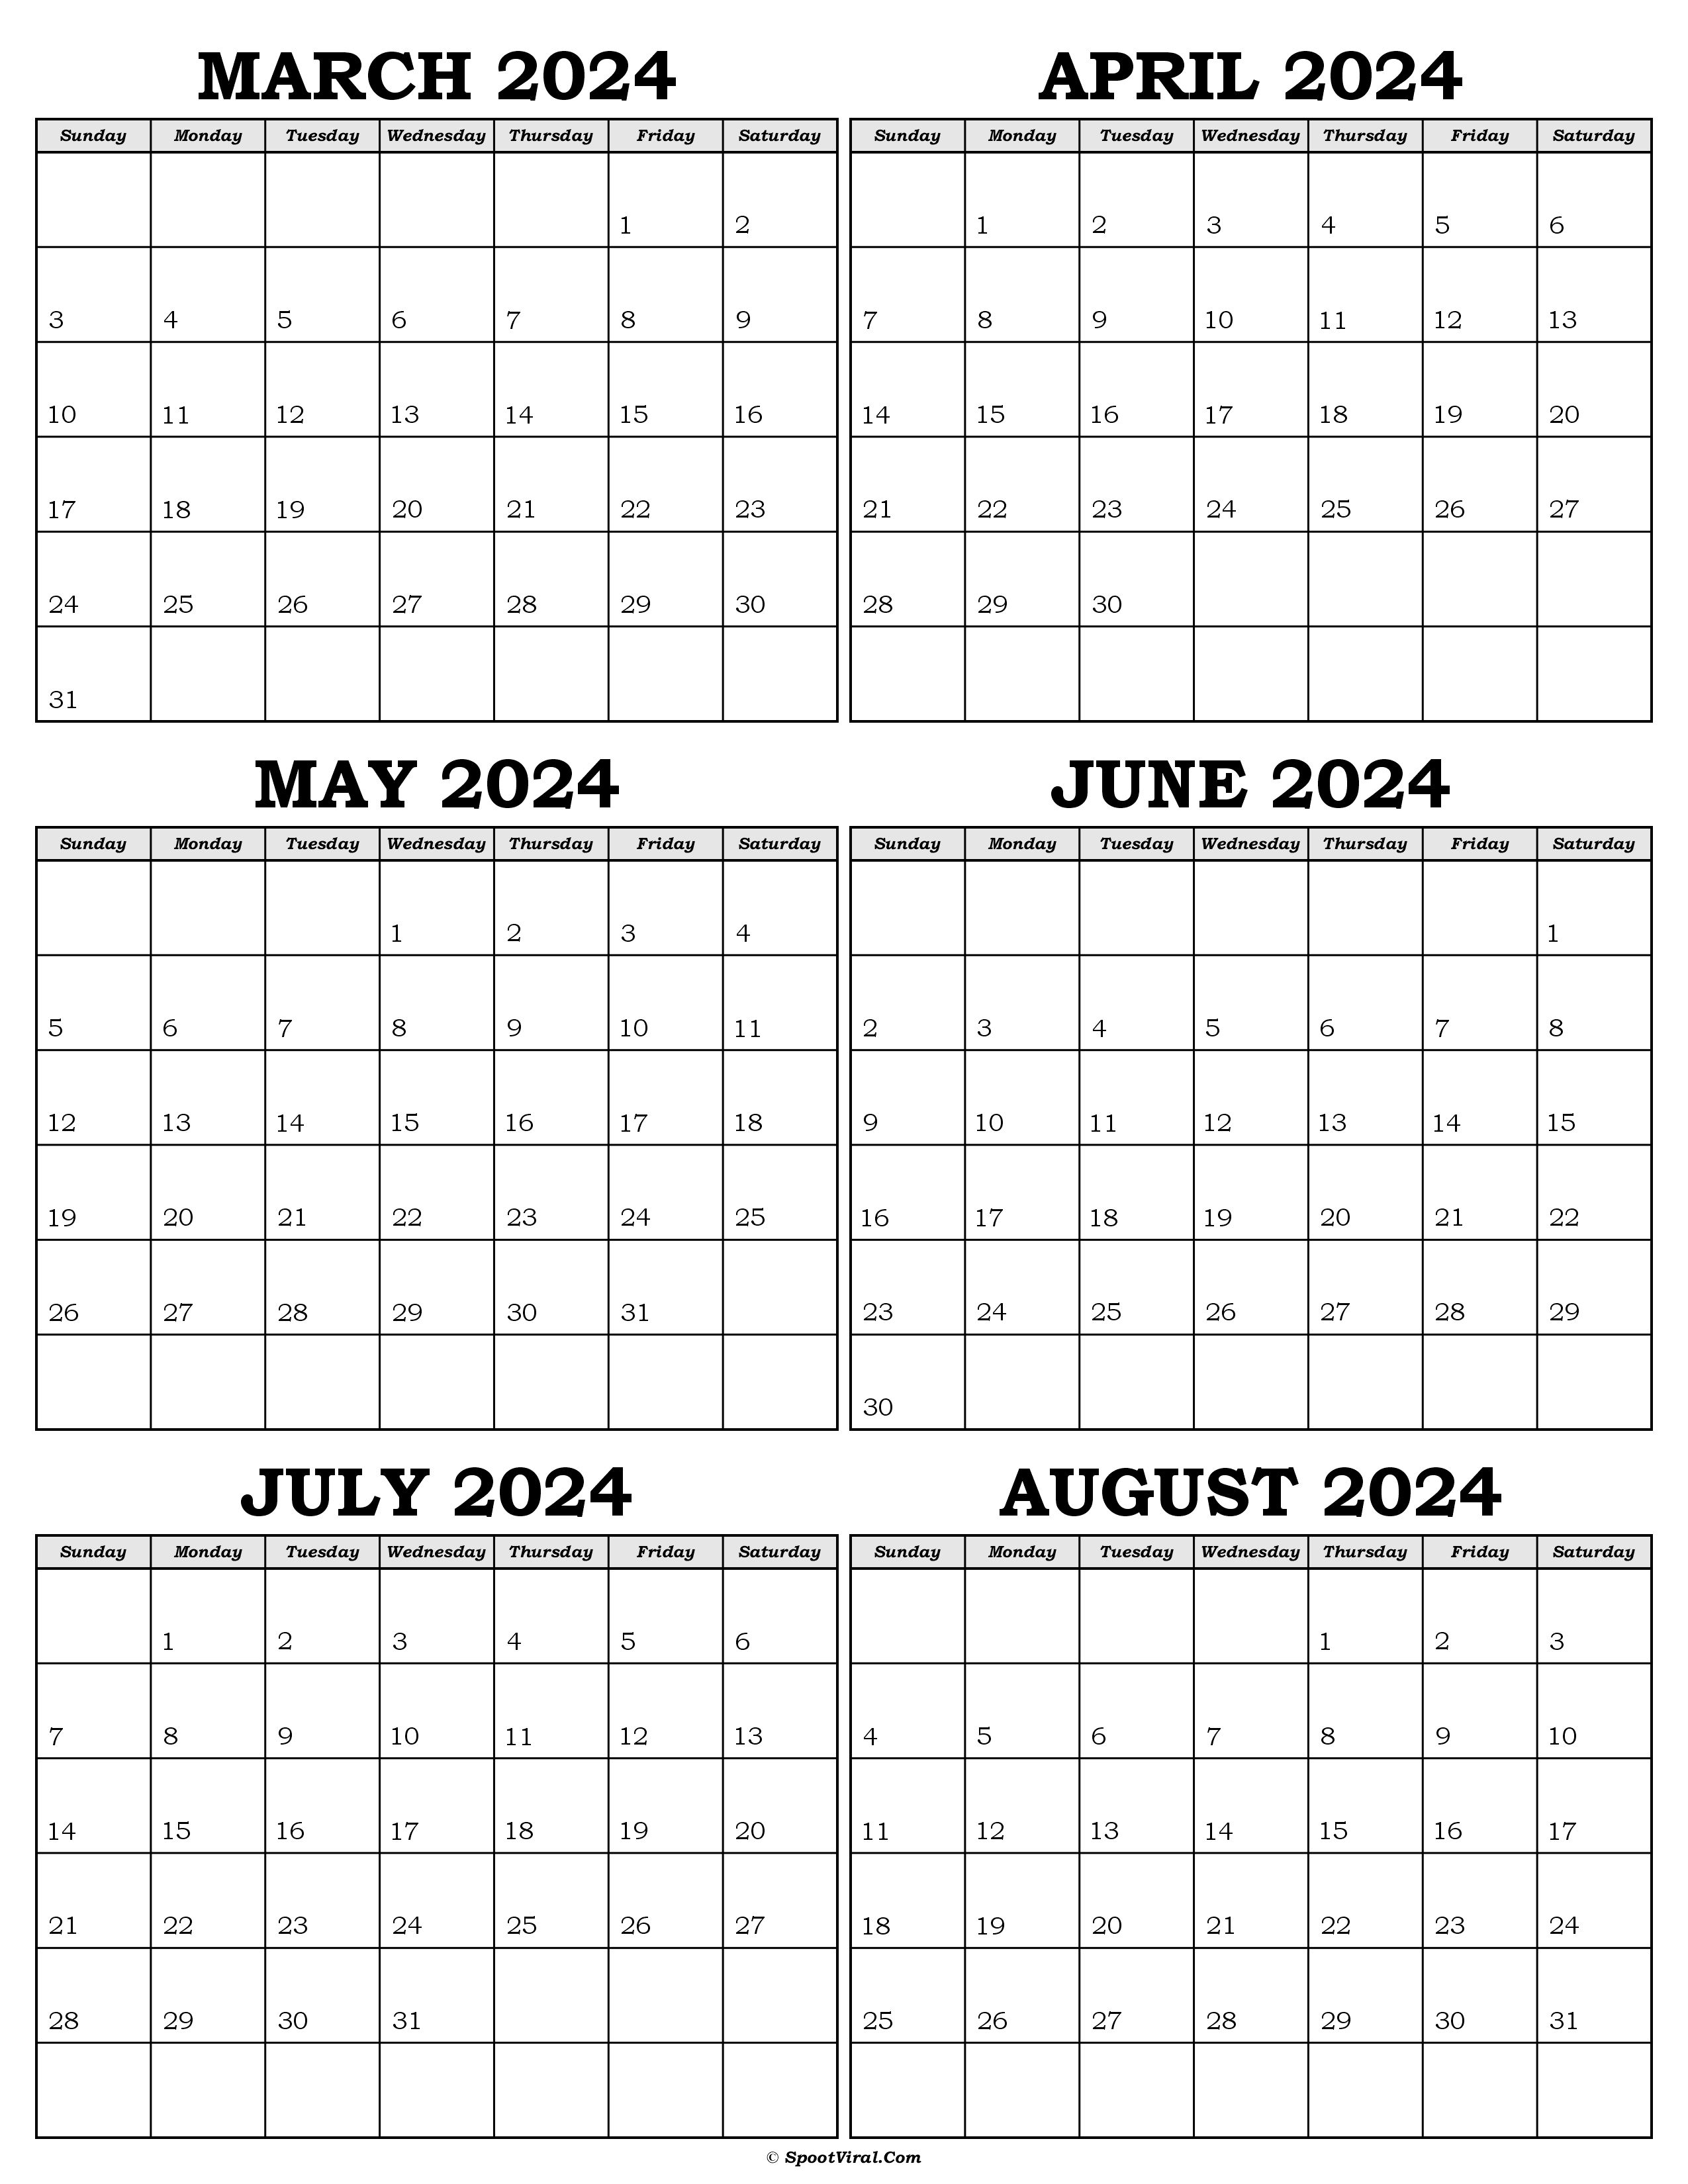 Calendar March to August 2024